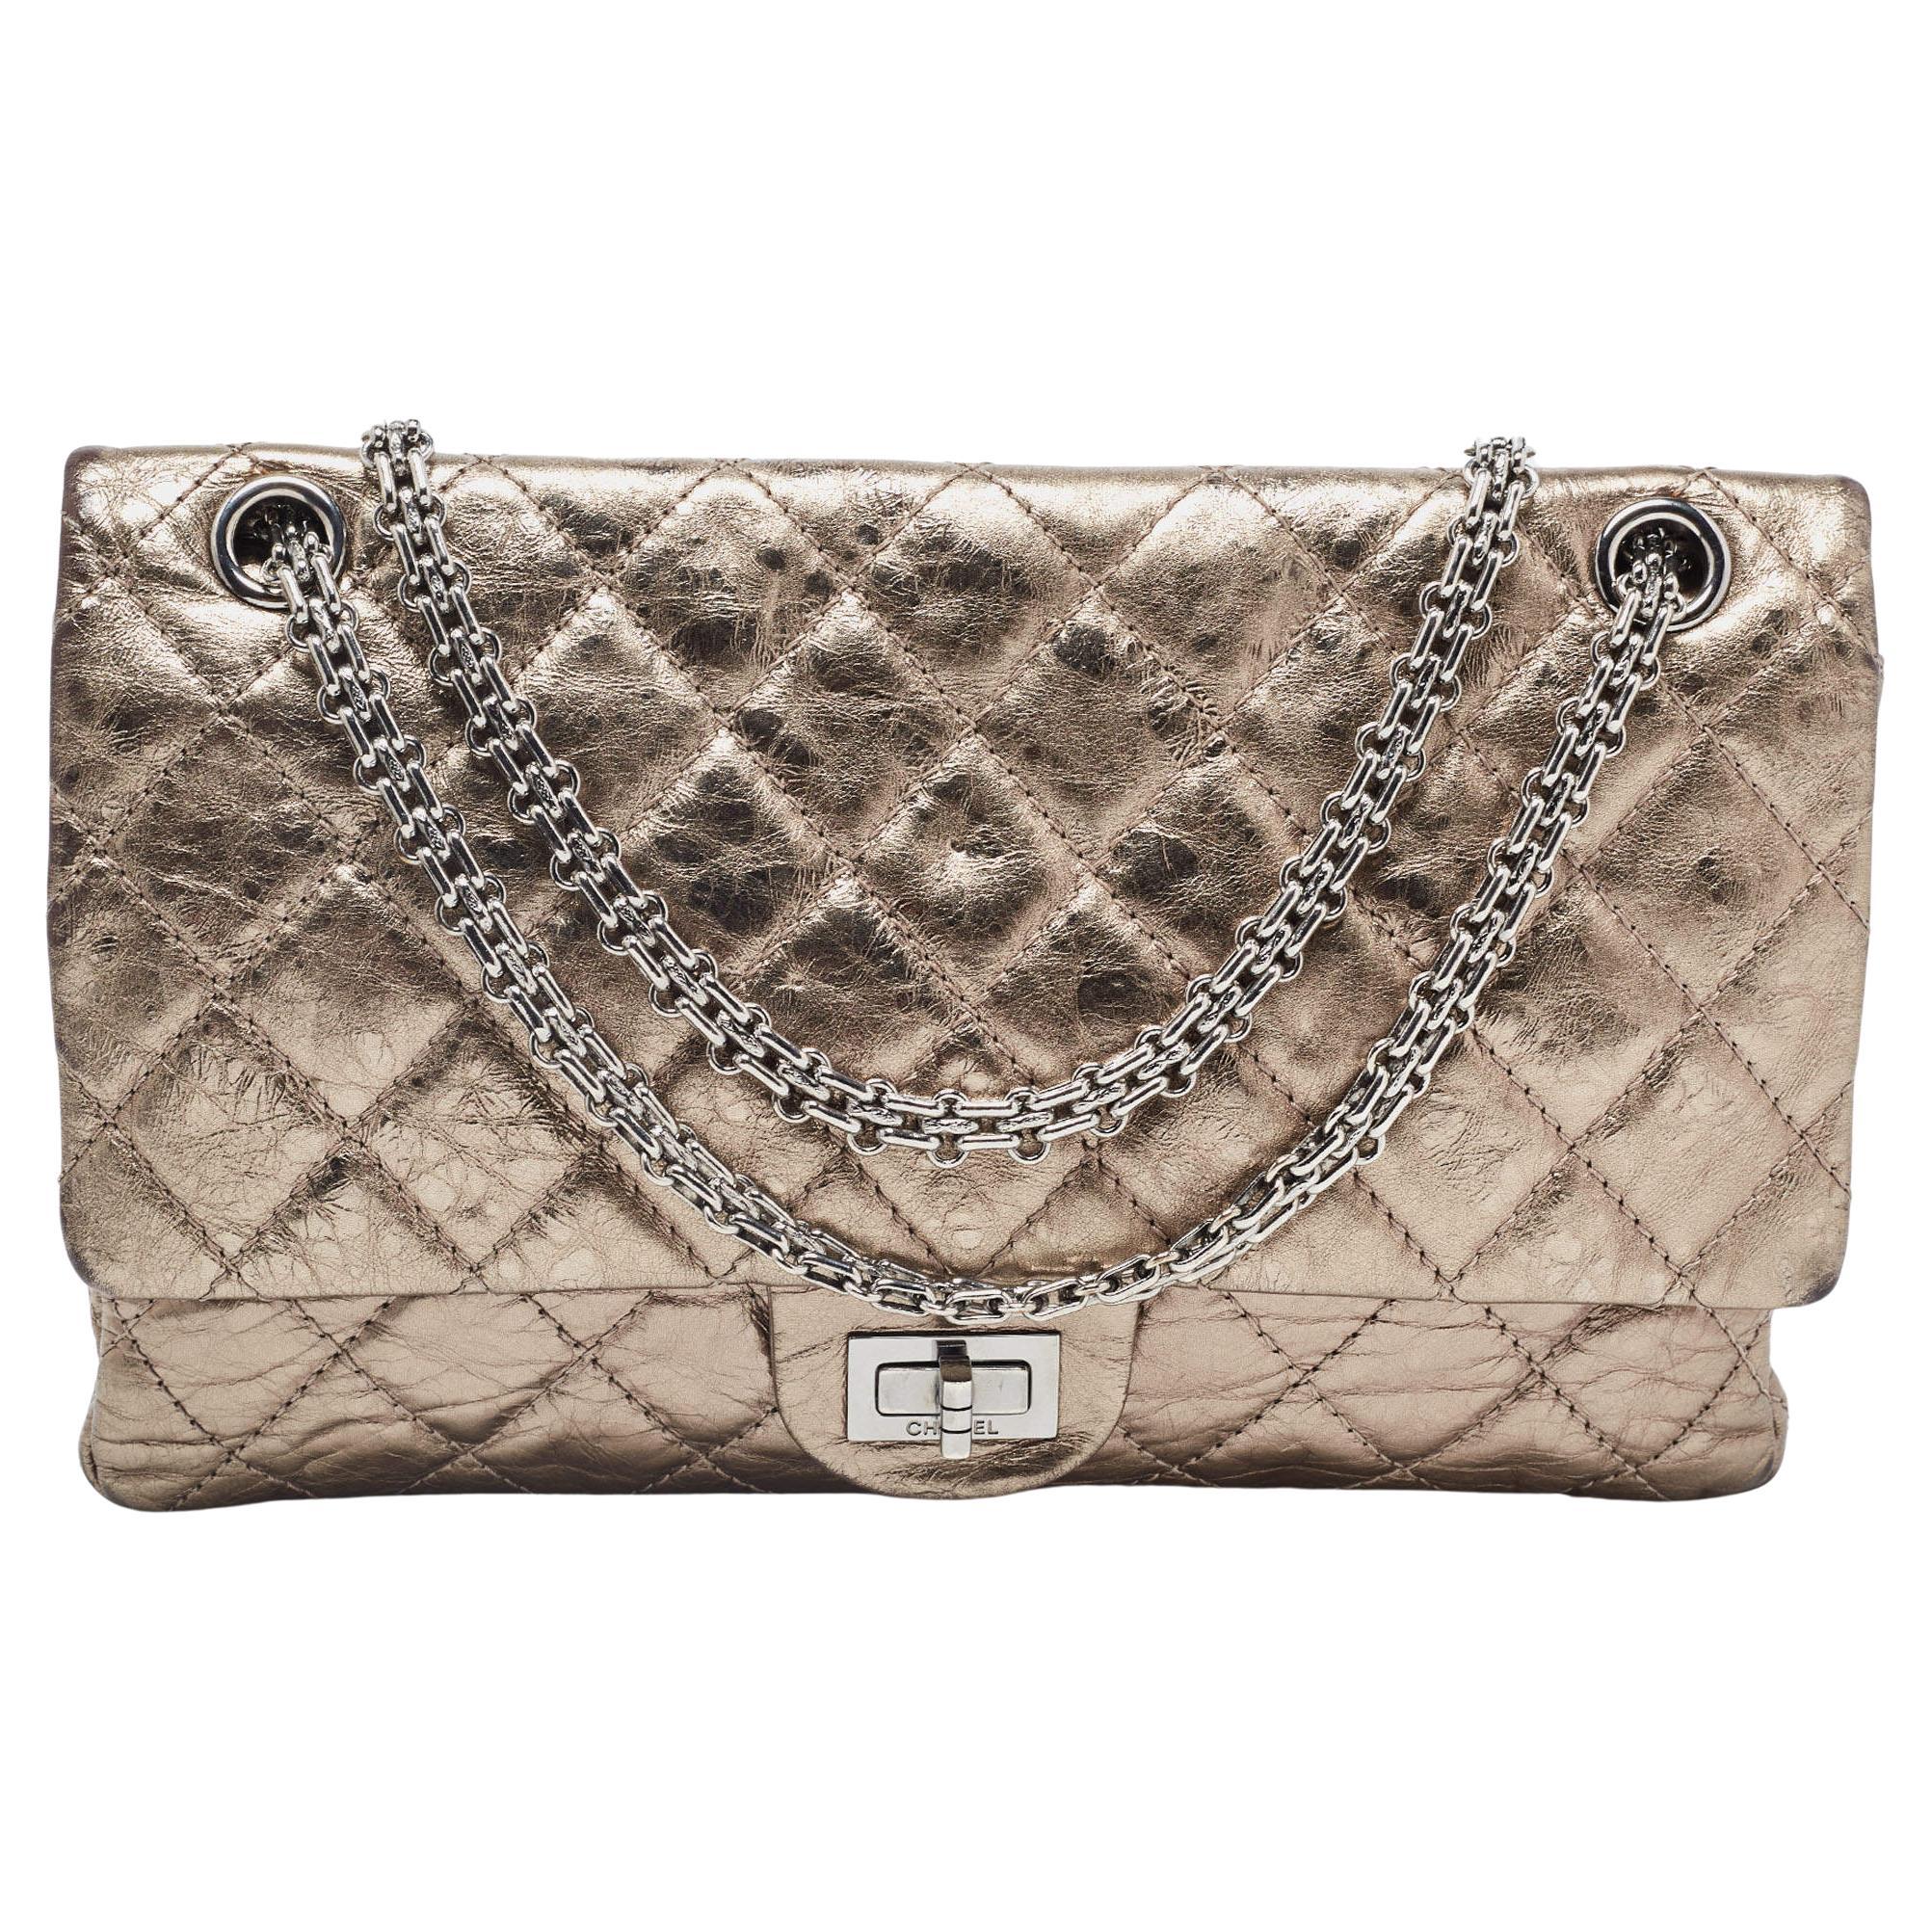 Chanel Metallic Quilted Aged Leather Reissue 2.55 Classic 226 Flap Bag For Sale